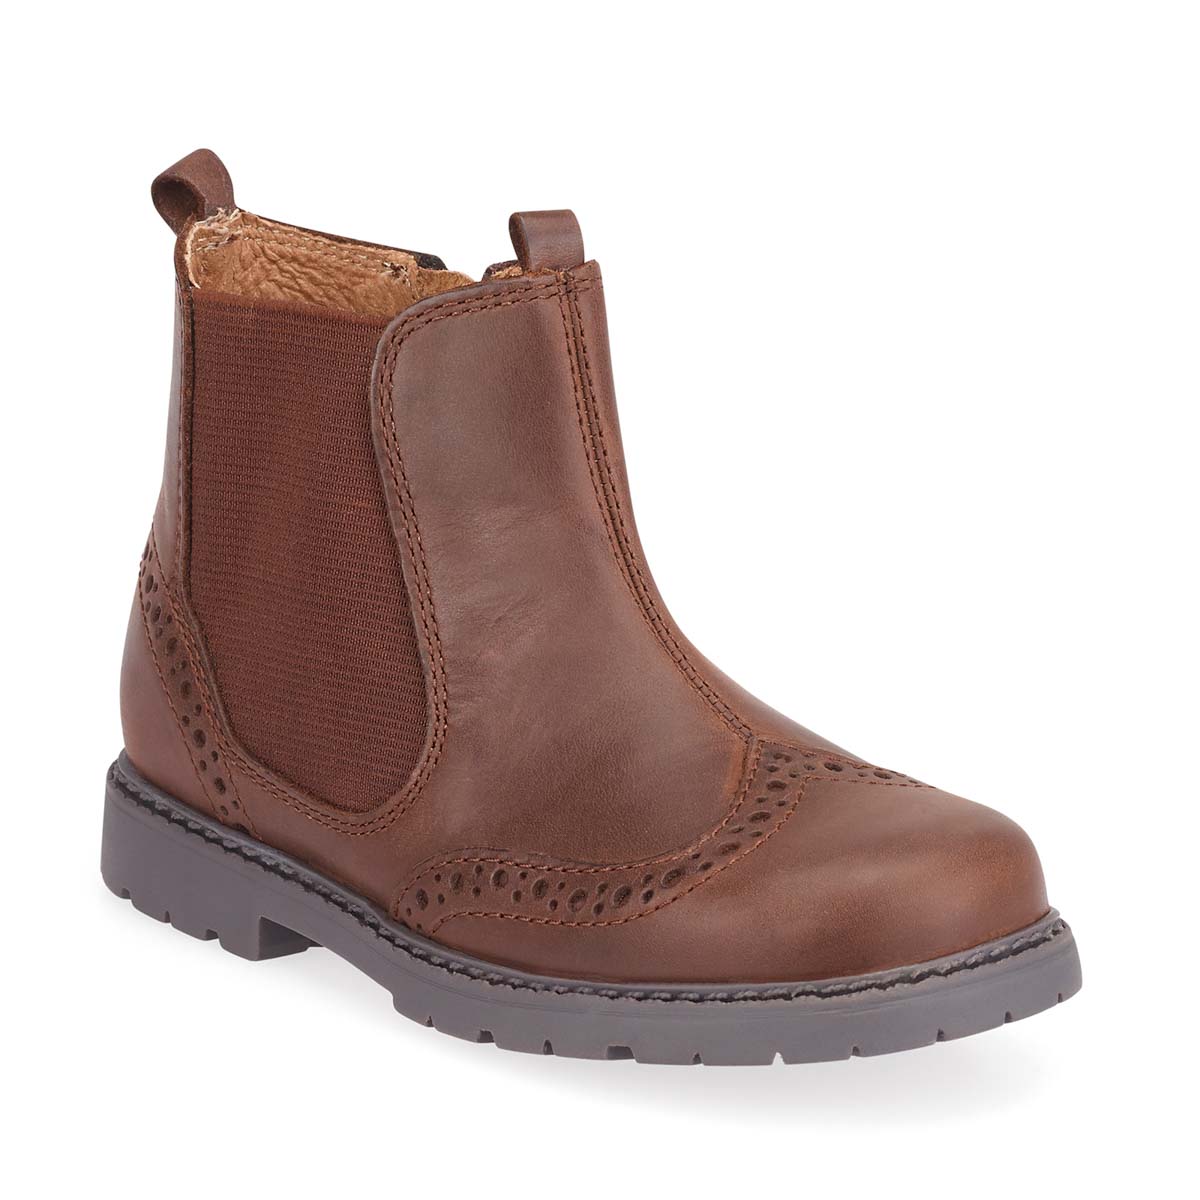 Start Rite Chelsea Brown leather Kids Girls Boots 1727-06F in a Plain Leather in Size 10.5